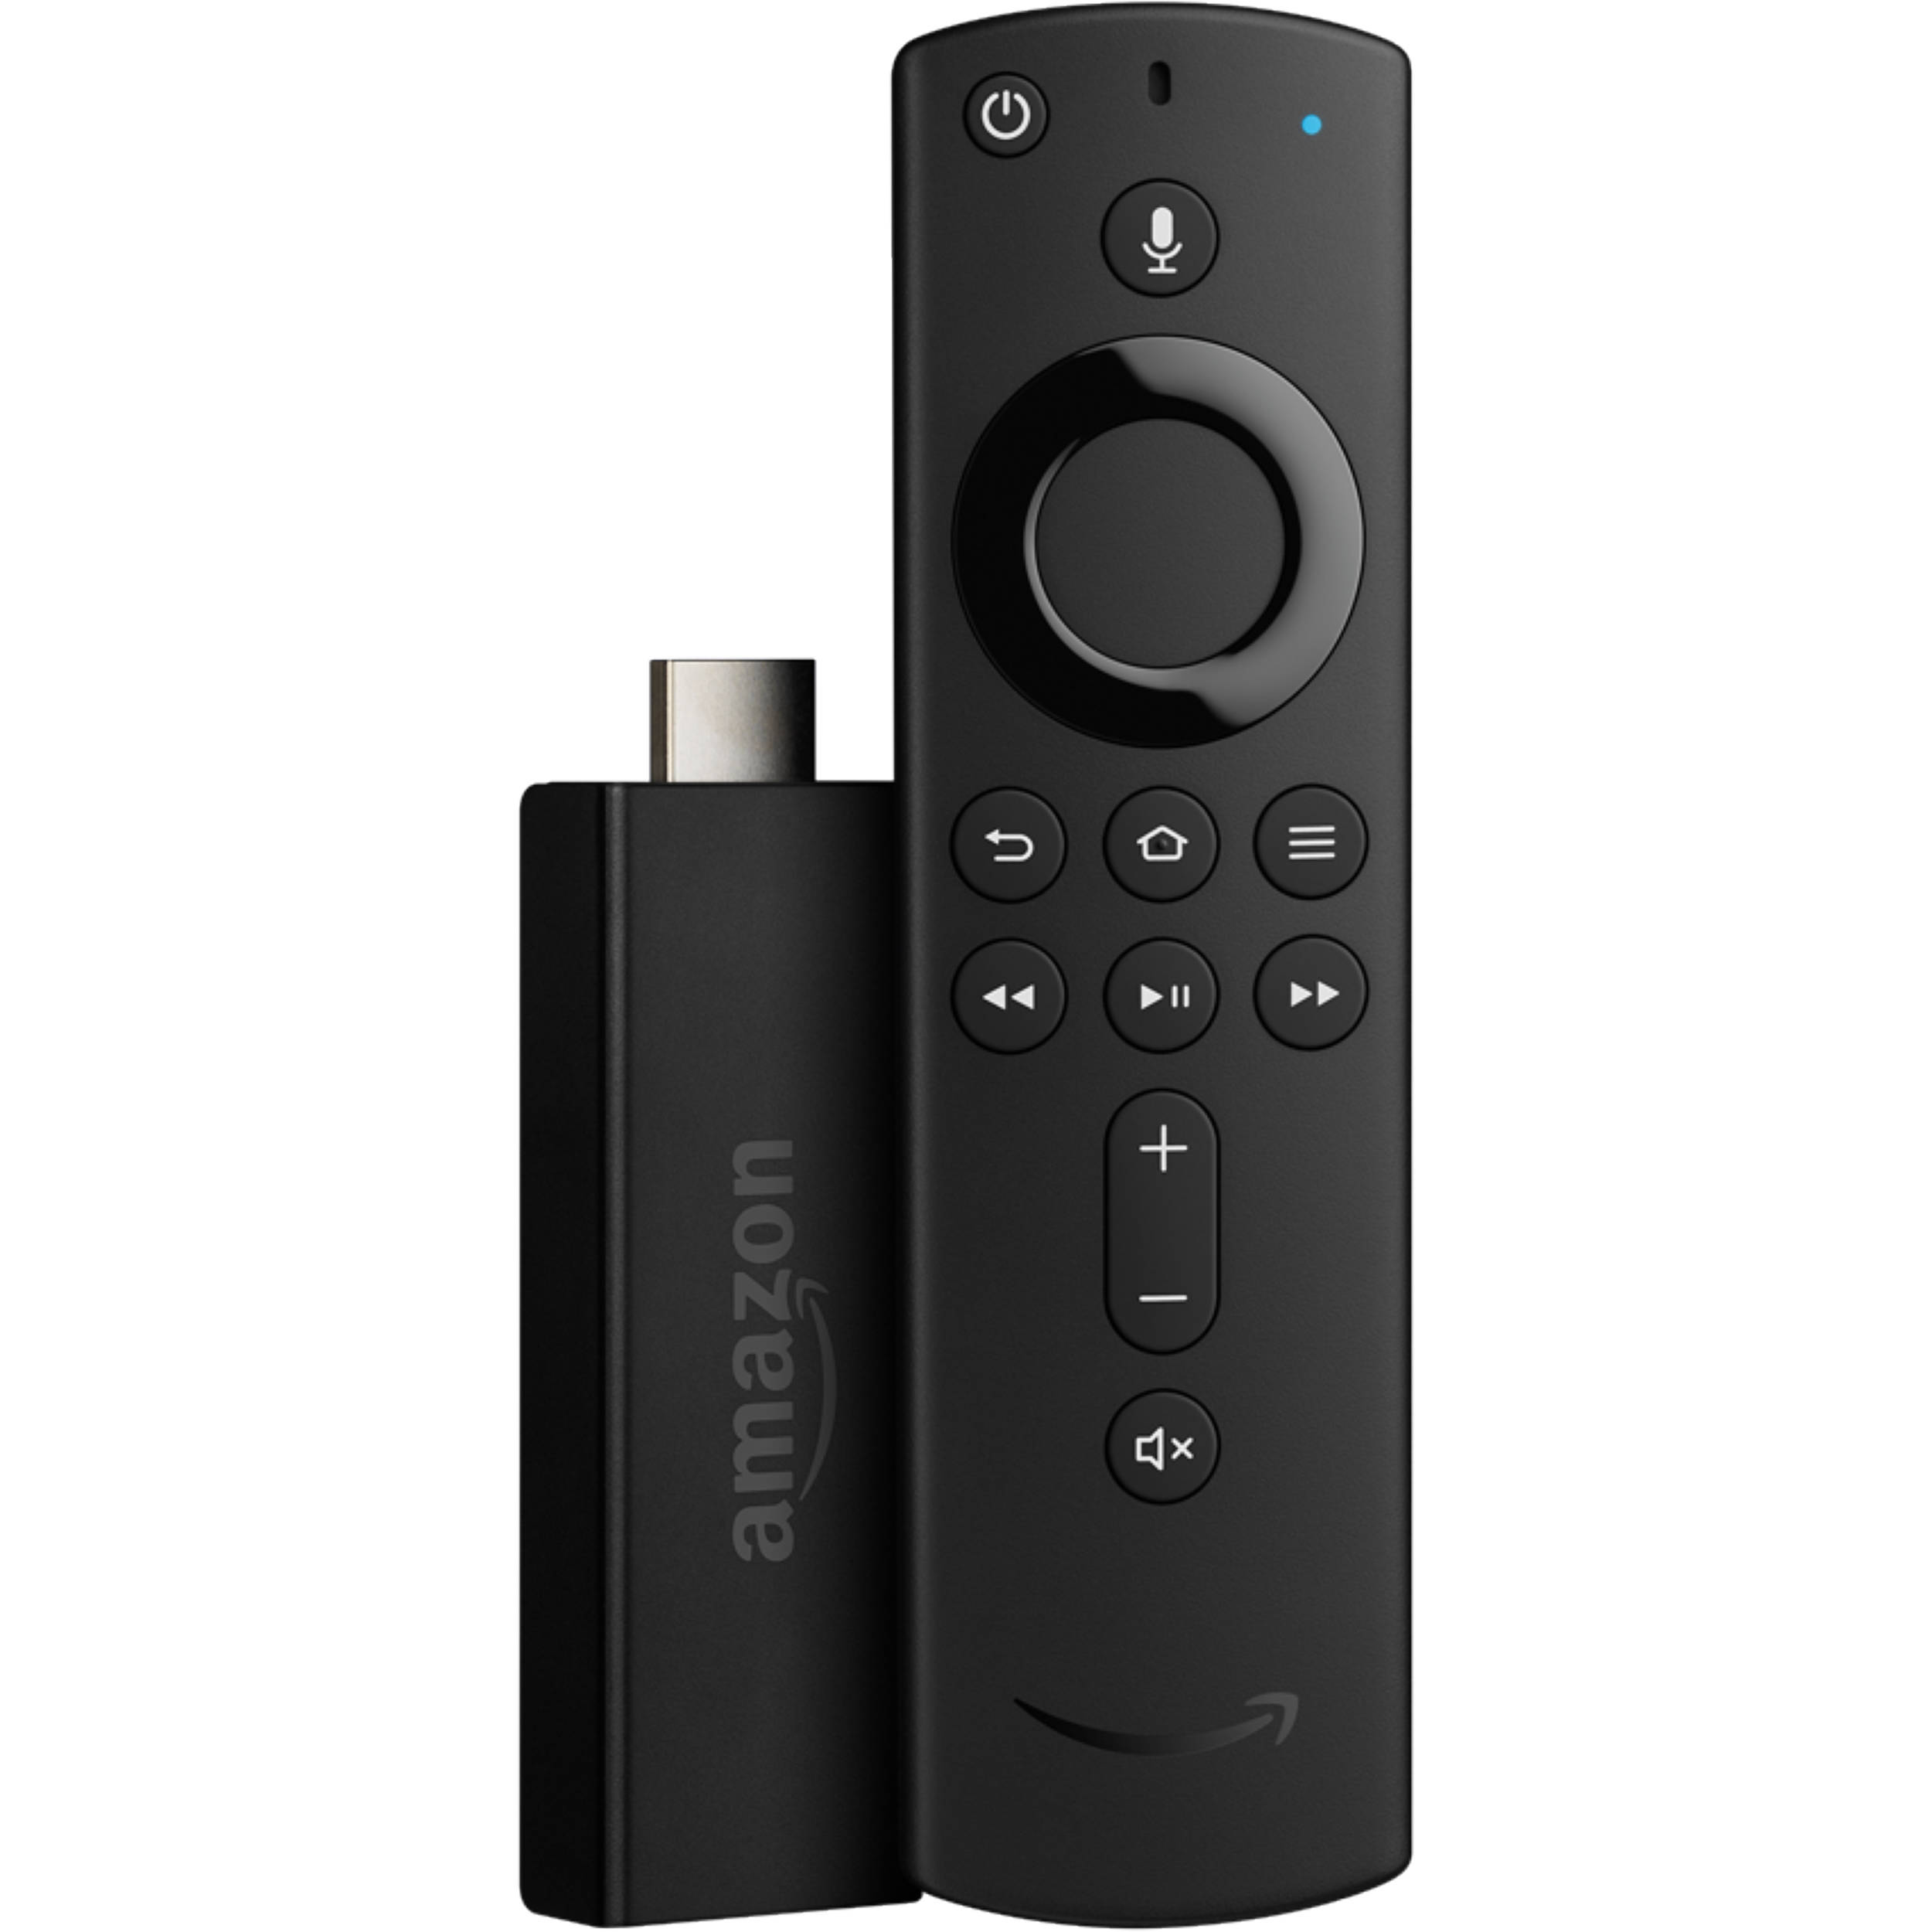 what is needed for amazon fire stick